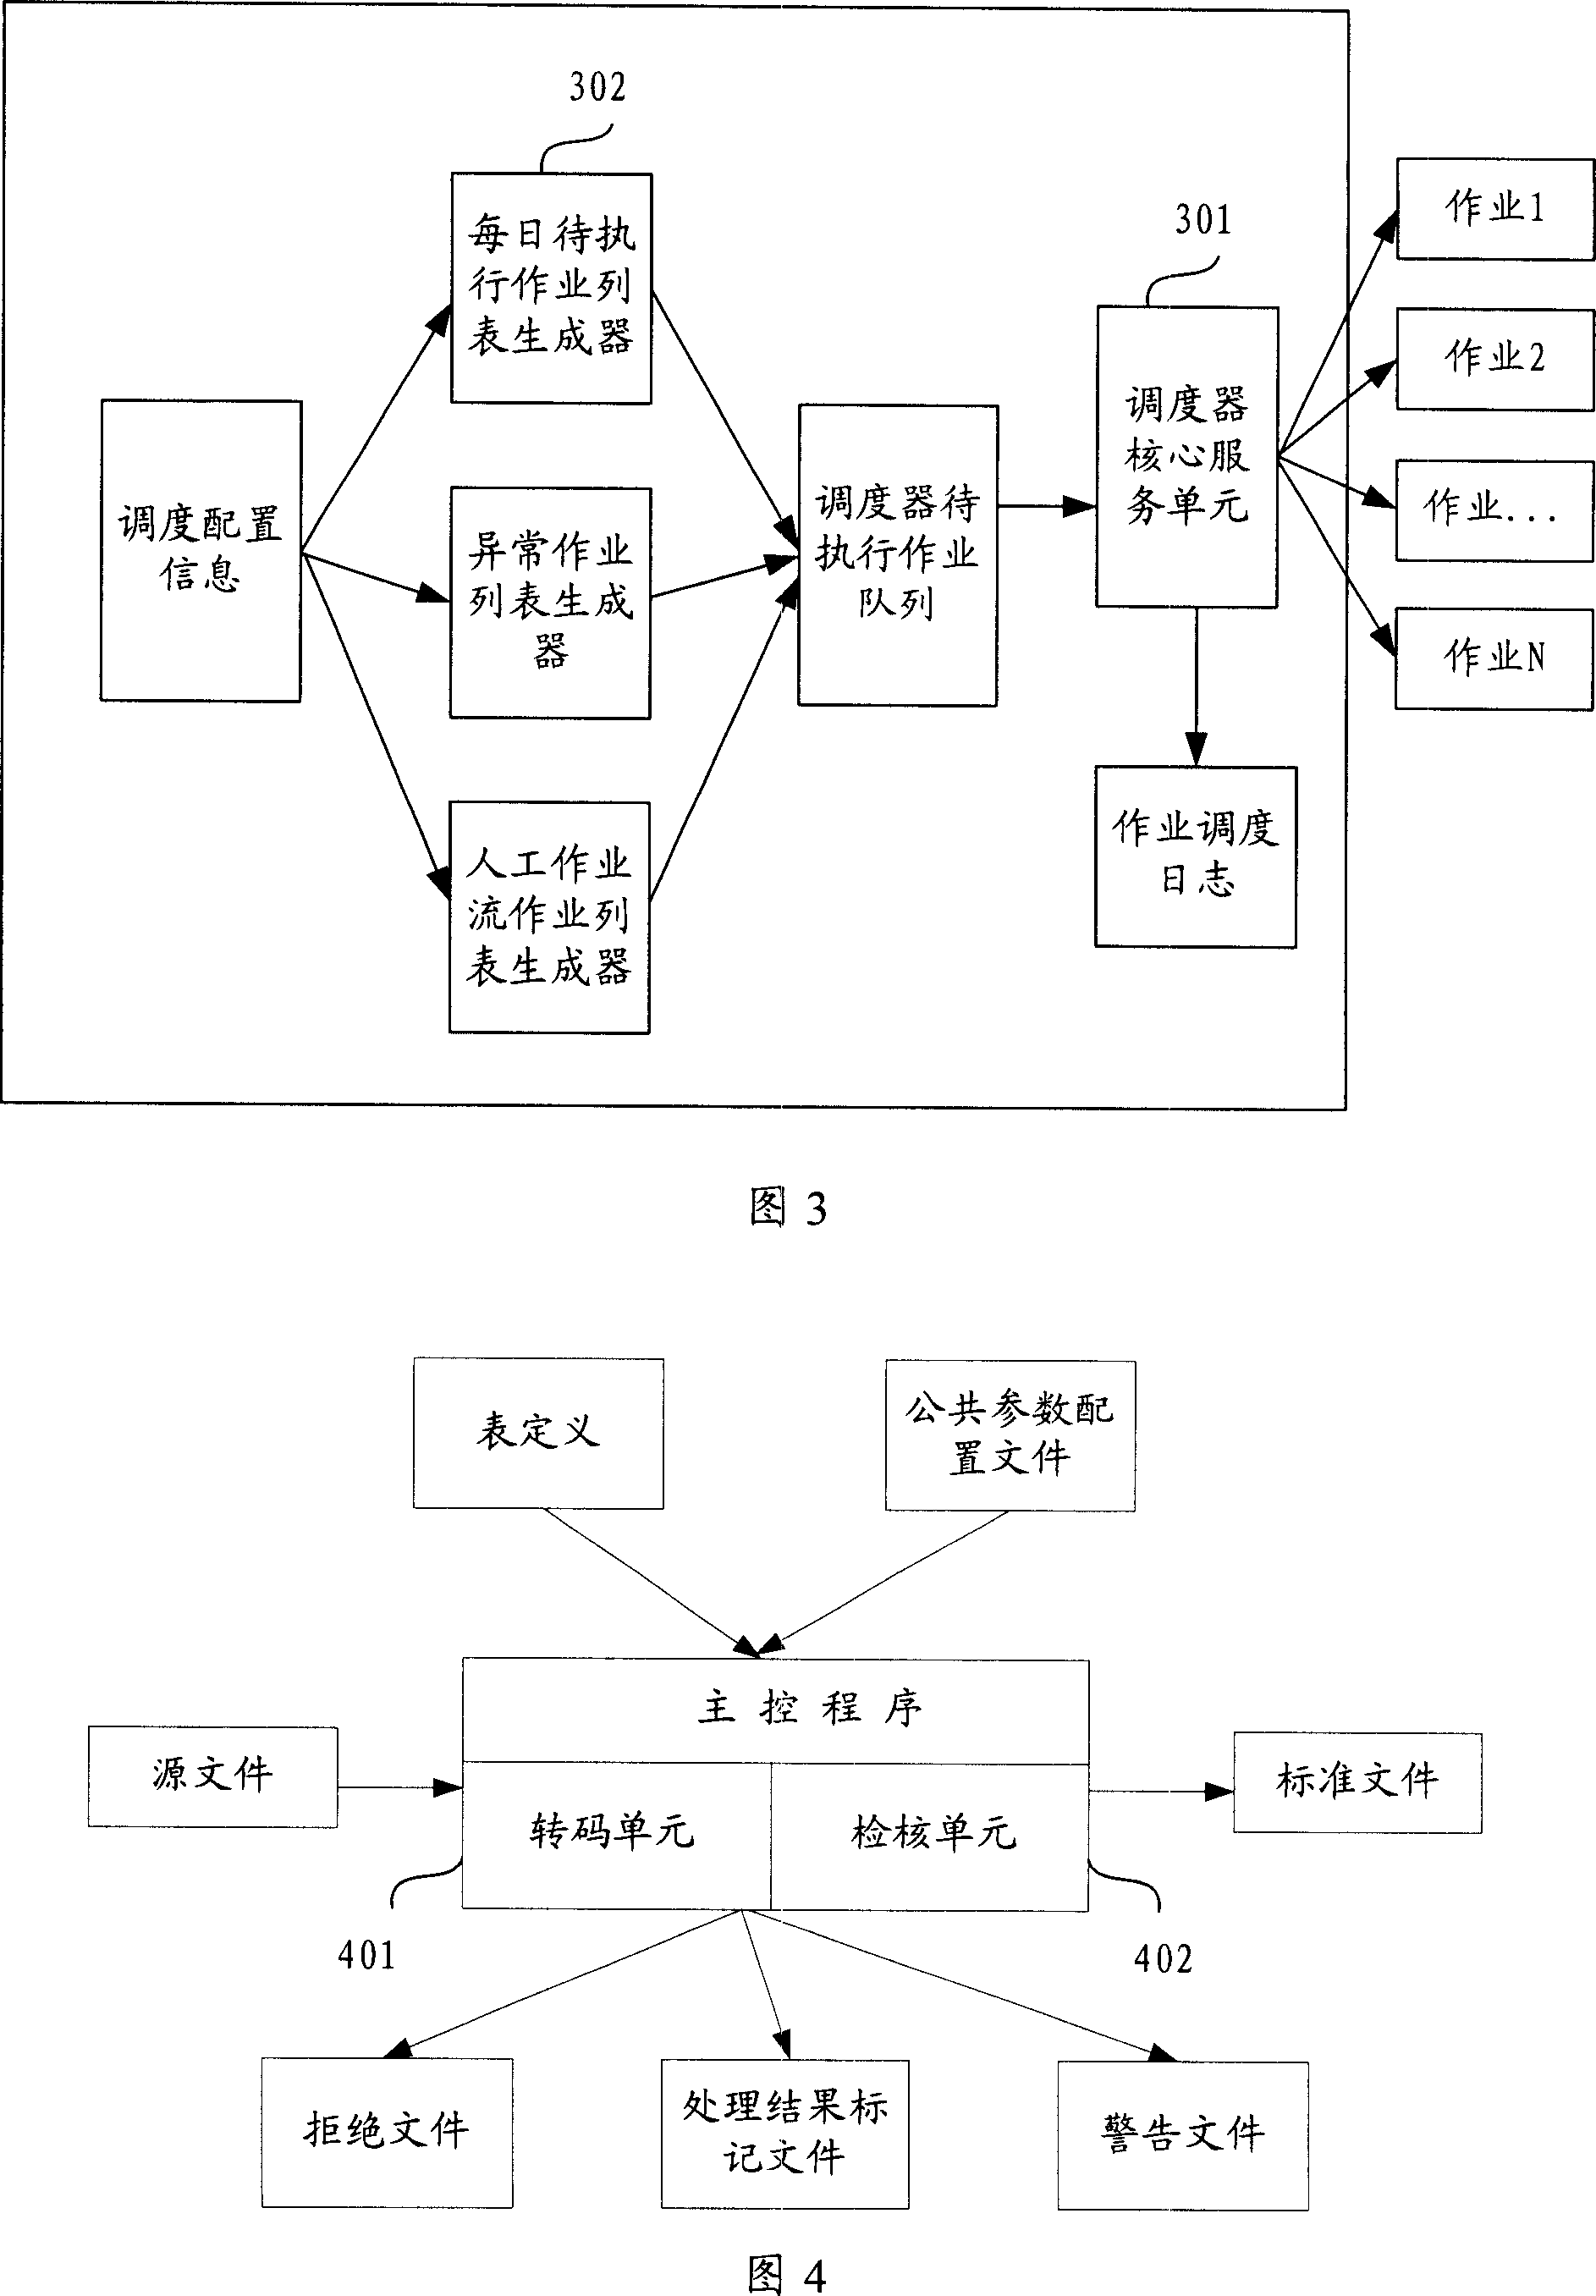 Integrated processing system and method for the data exchange between different application systems